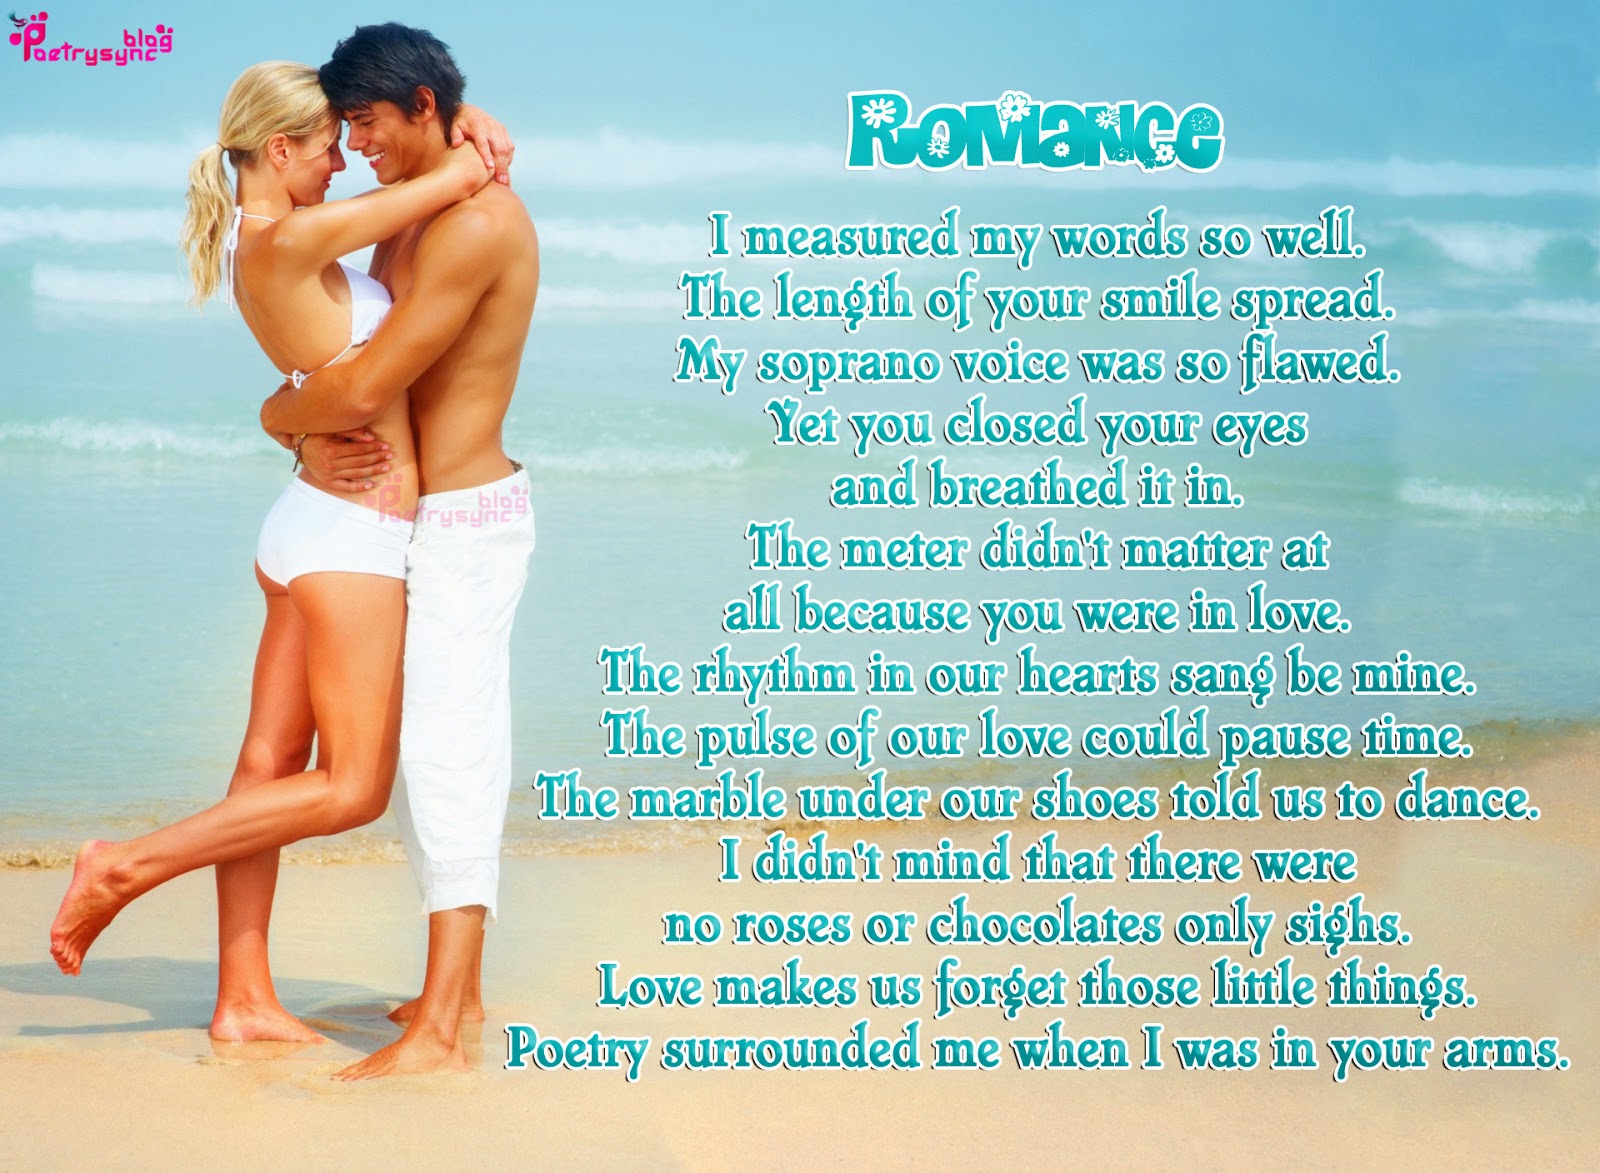 Romantic poems for him to make him cry